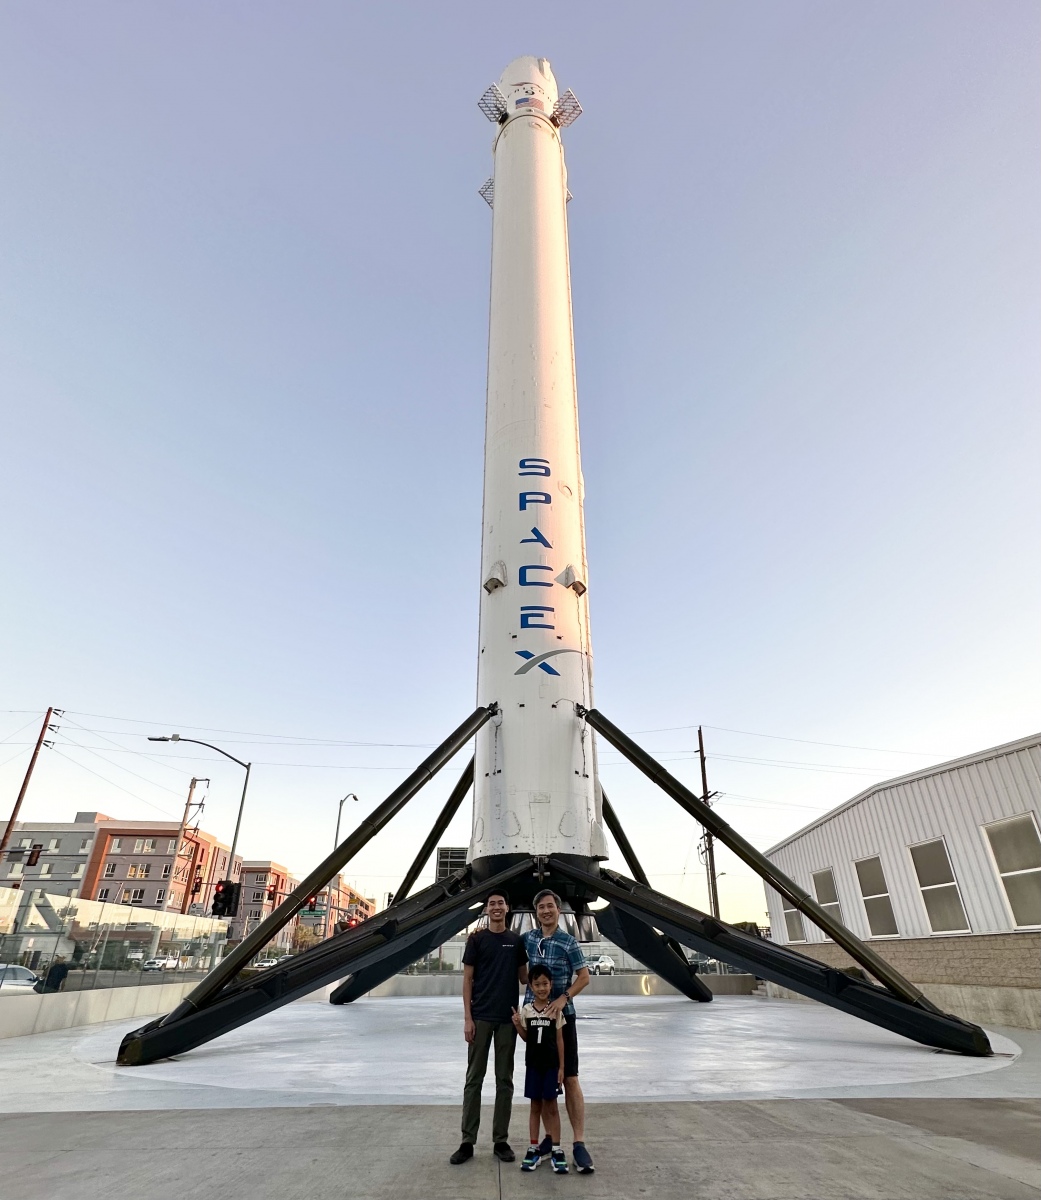 20220922 - Ryan and Hanh-Phuc with the Falcon 9, SpaceX, Hawthorne, CA 90250